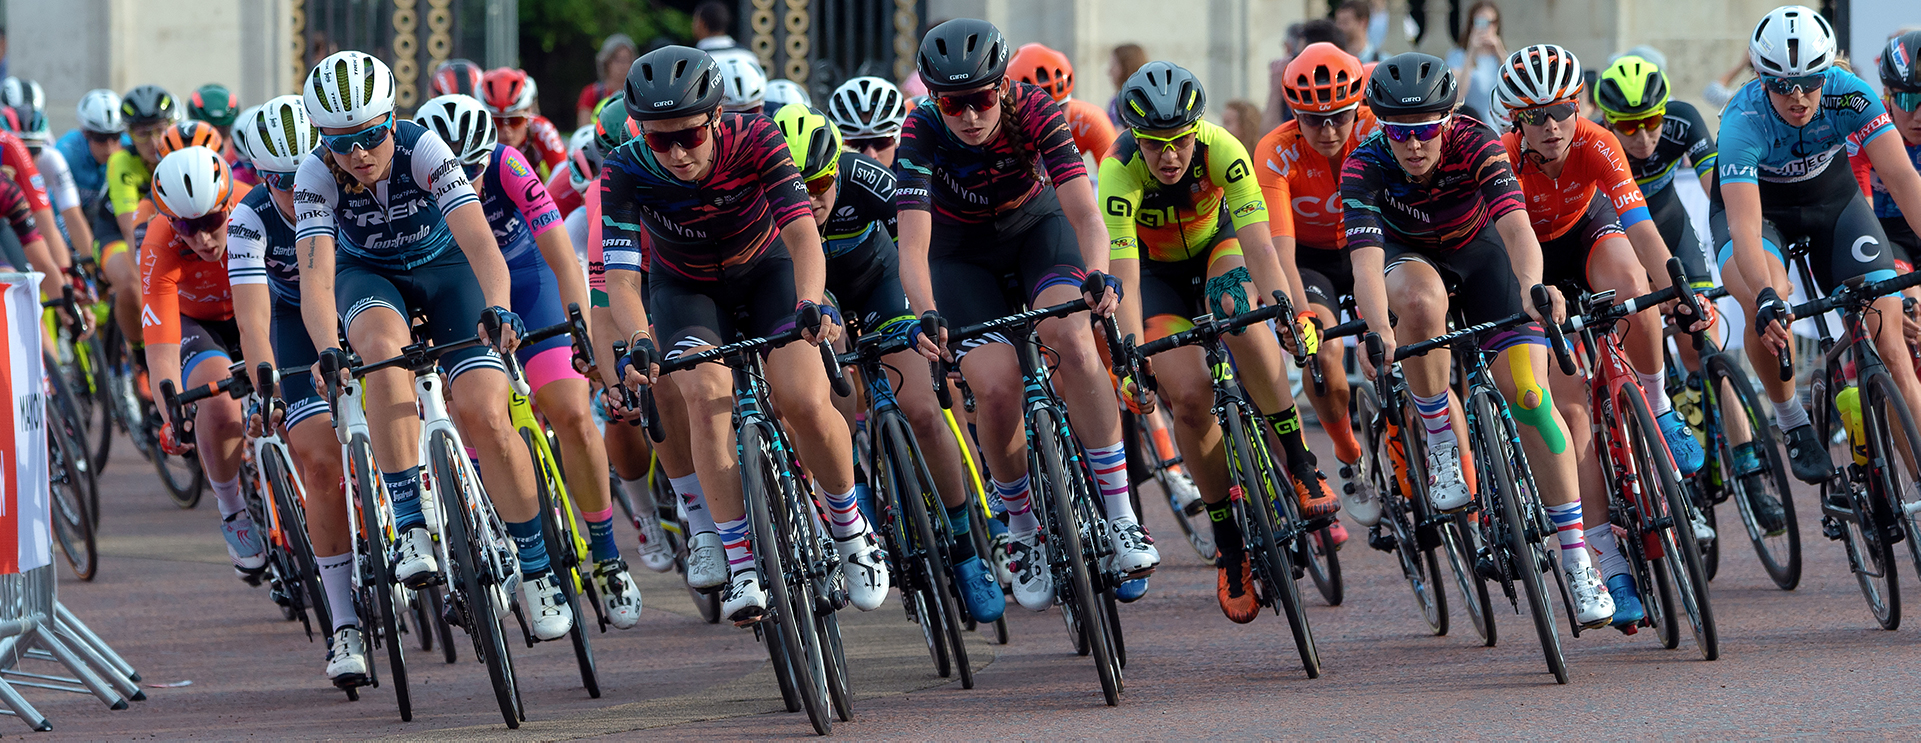 Cyclists in a group racing on the street.